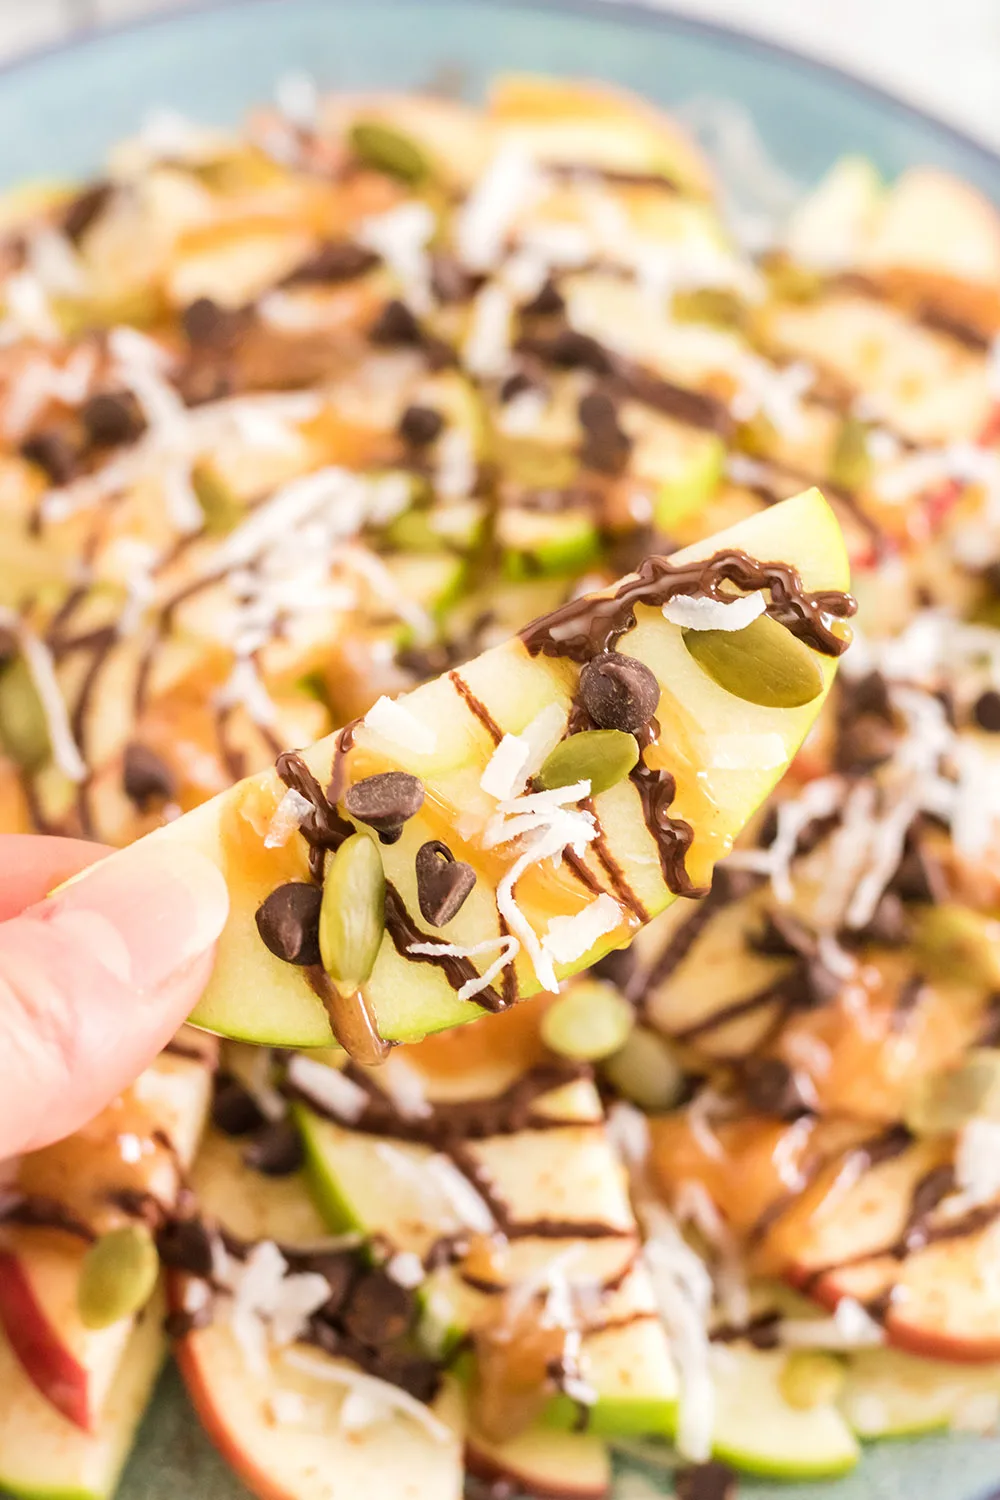 Apples topped with nuts, caramel, and chocolate for apple nachos.